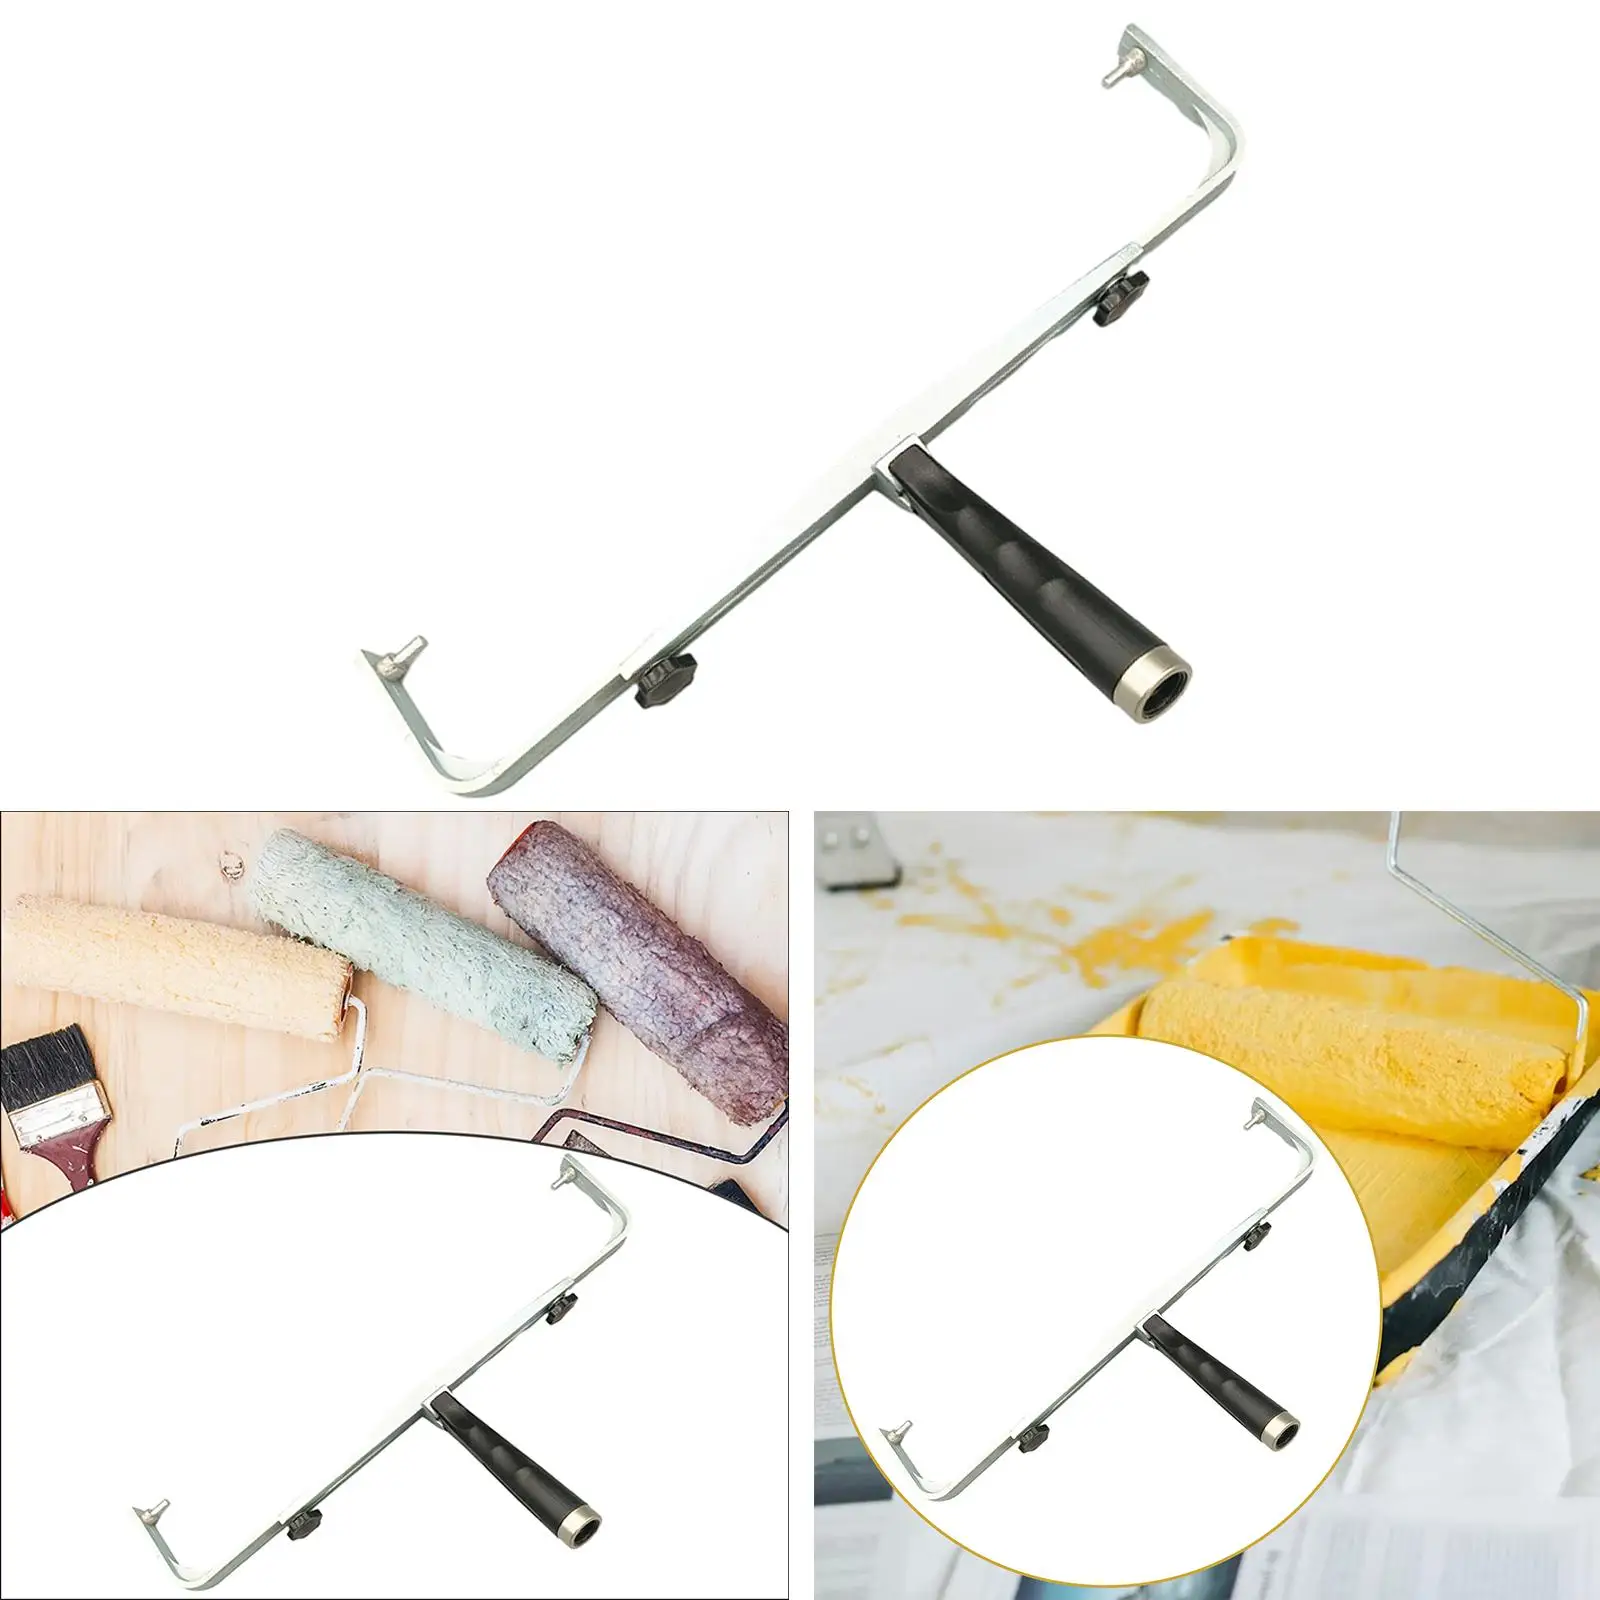 18inch Paint Roller Frame Aluminum Alloy Accessories Durable Heavy Duty Adjustable for Painting Walls Professional Versatile